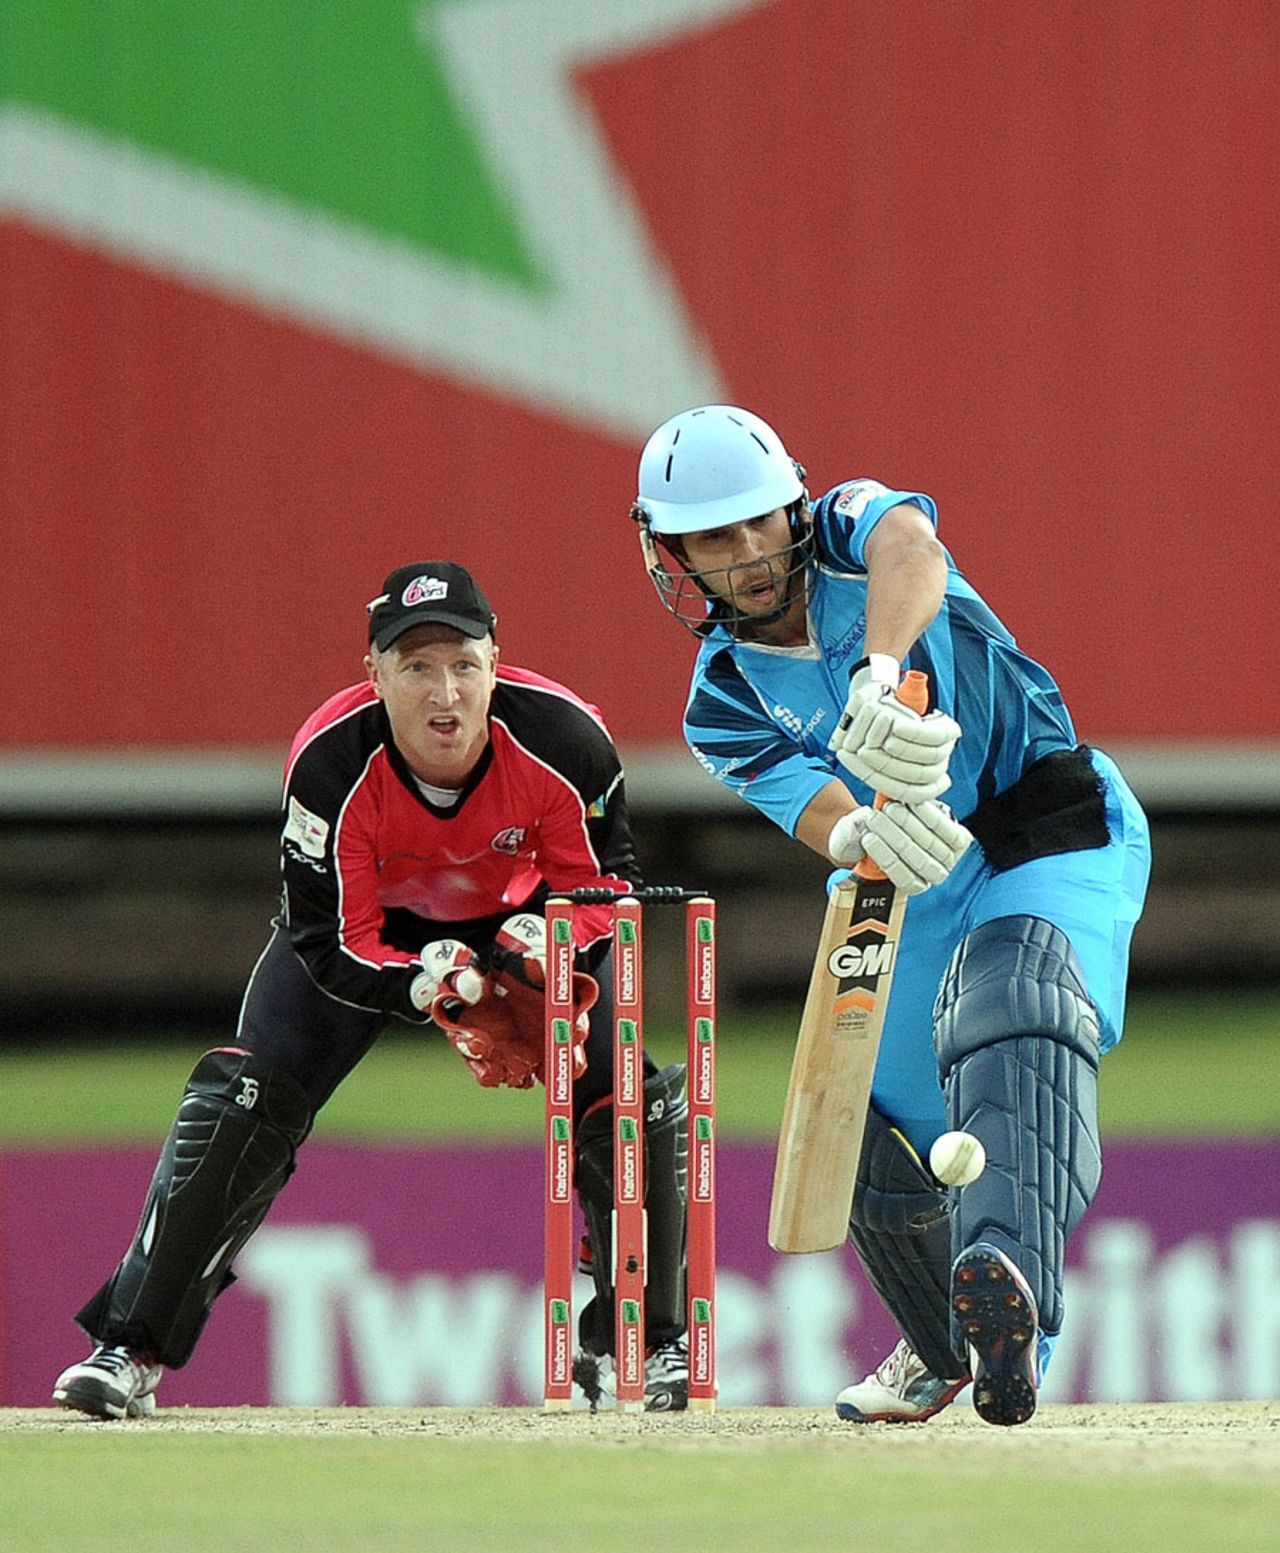 Farhaan Behardien was unable to get going, Titans v Sydney Sixers, 2nd semi-final, Champions League T20, Centurion, October 26, 2012